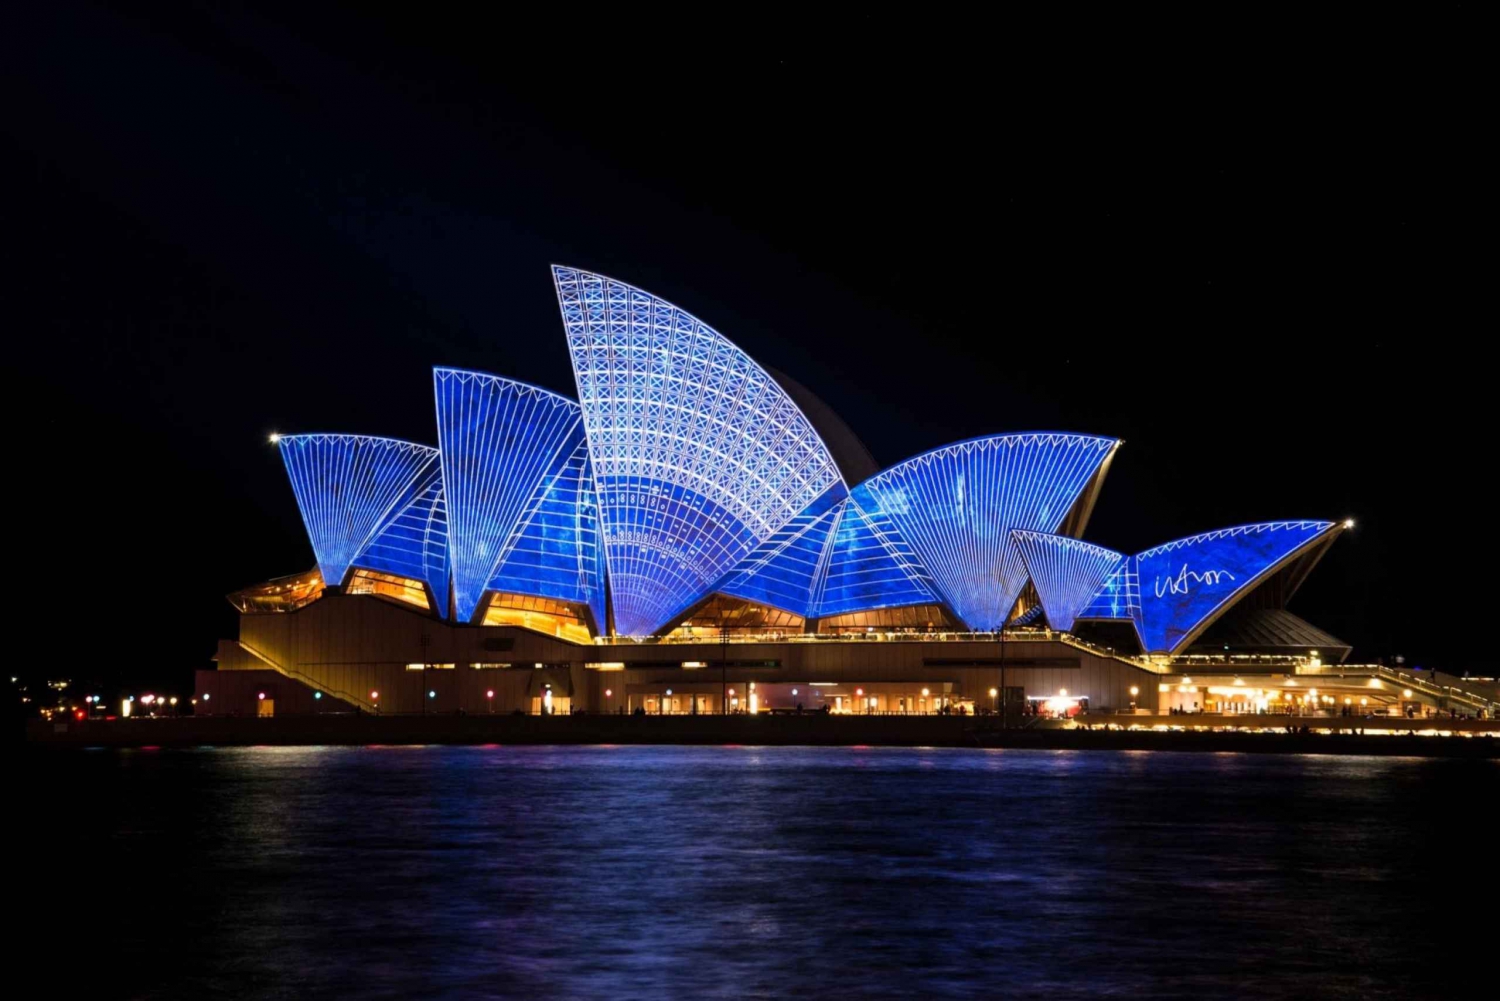 Sydney Highlights Self-Guided Scavenger Hunt and City Tour